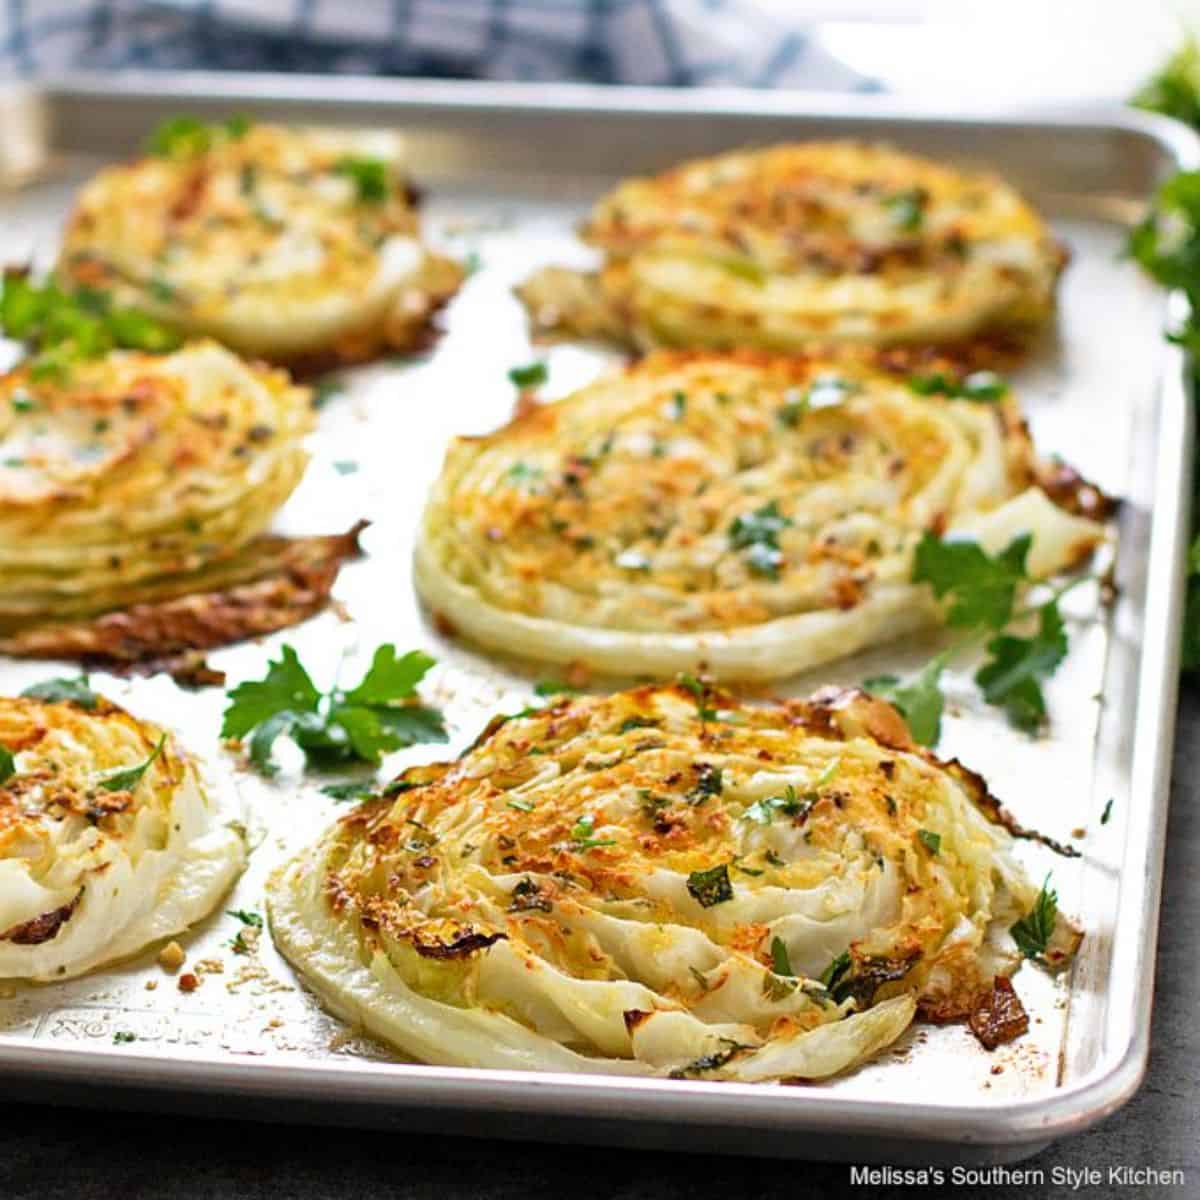 Delicious Oven Roasted Cabbage Steaks on a baking tray.